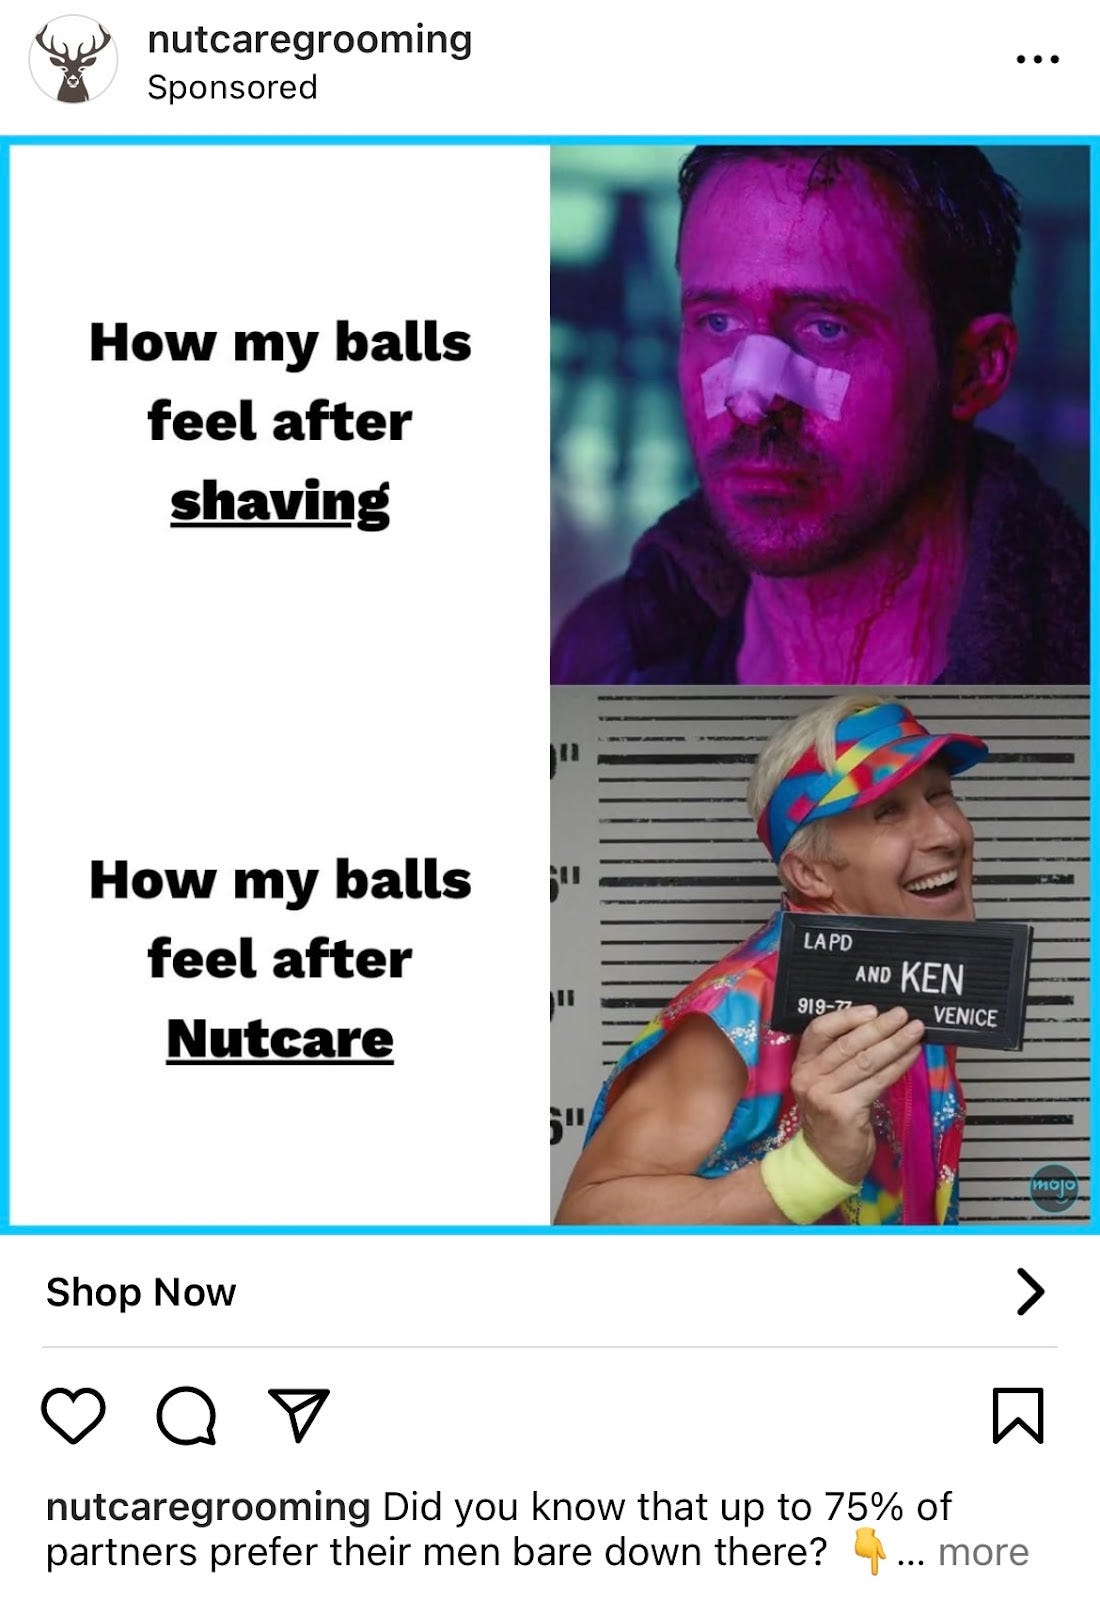 An Instagram ad from “nutcaregrooming” with a before and after meme format using Ryan Gosling looking sad from Blade Runner and Ryan Gosling looking happy as Ken in Barbie. The before text is “how my balls feel after shaving.” The after text is “how my balls feel after Nutecare.” 